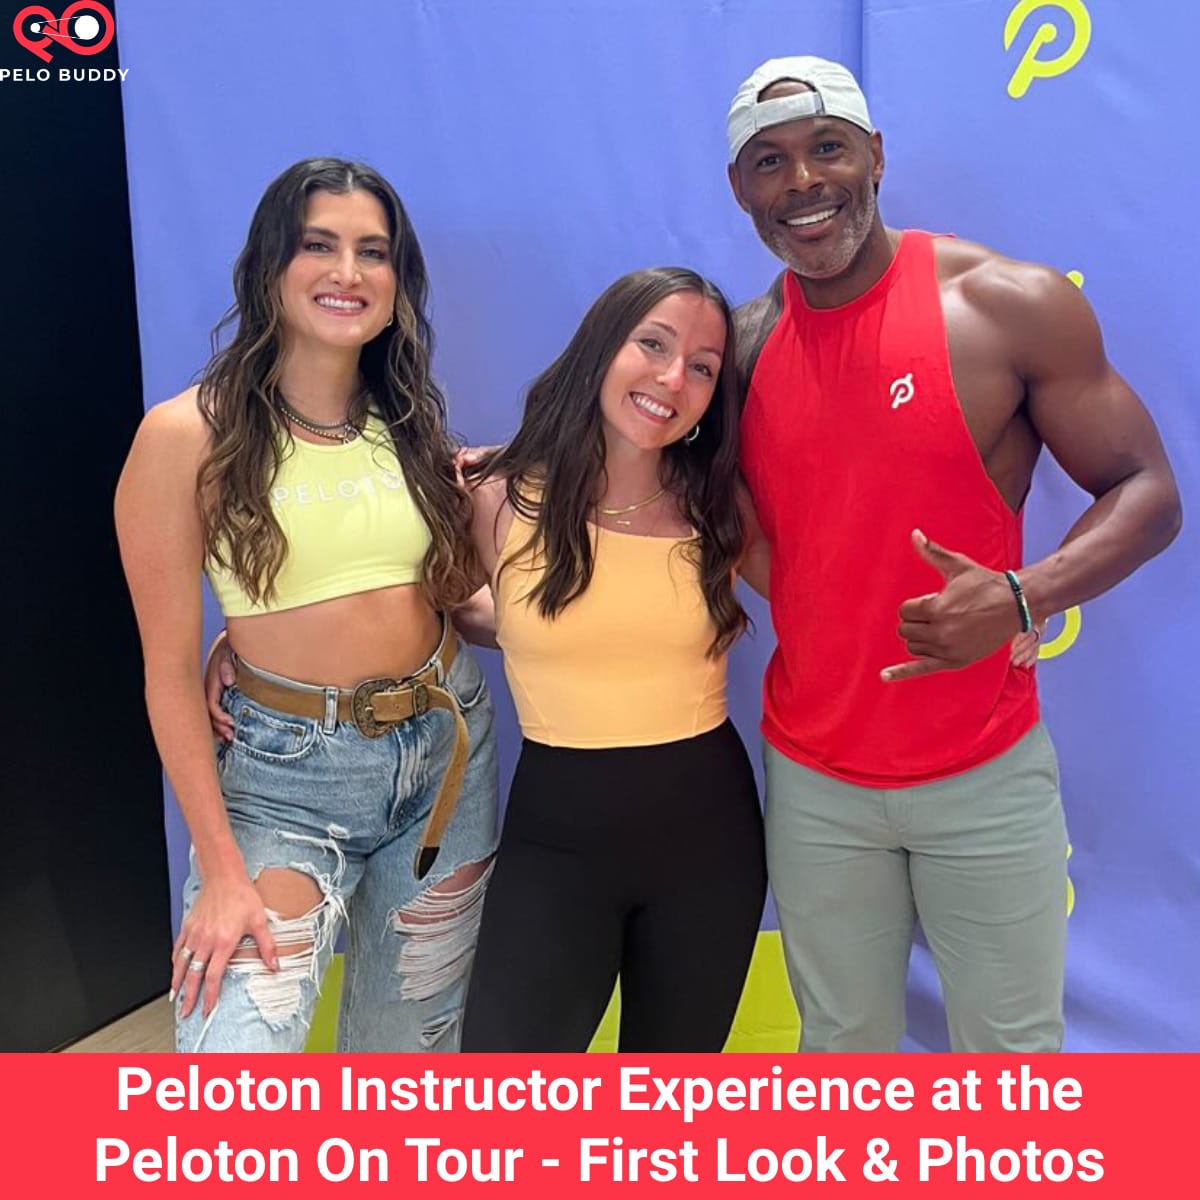 Peloton Instructor Experience for Peloton On Tour: What is it